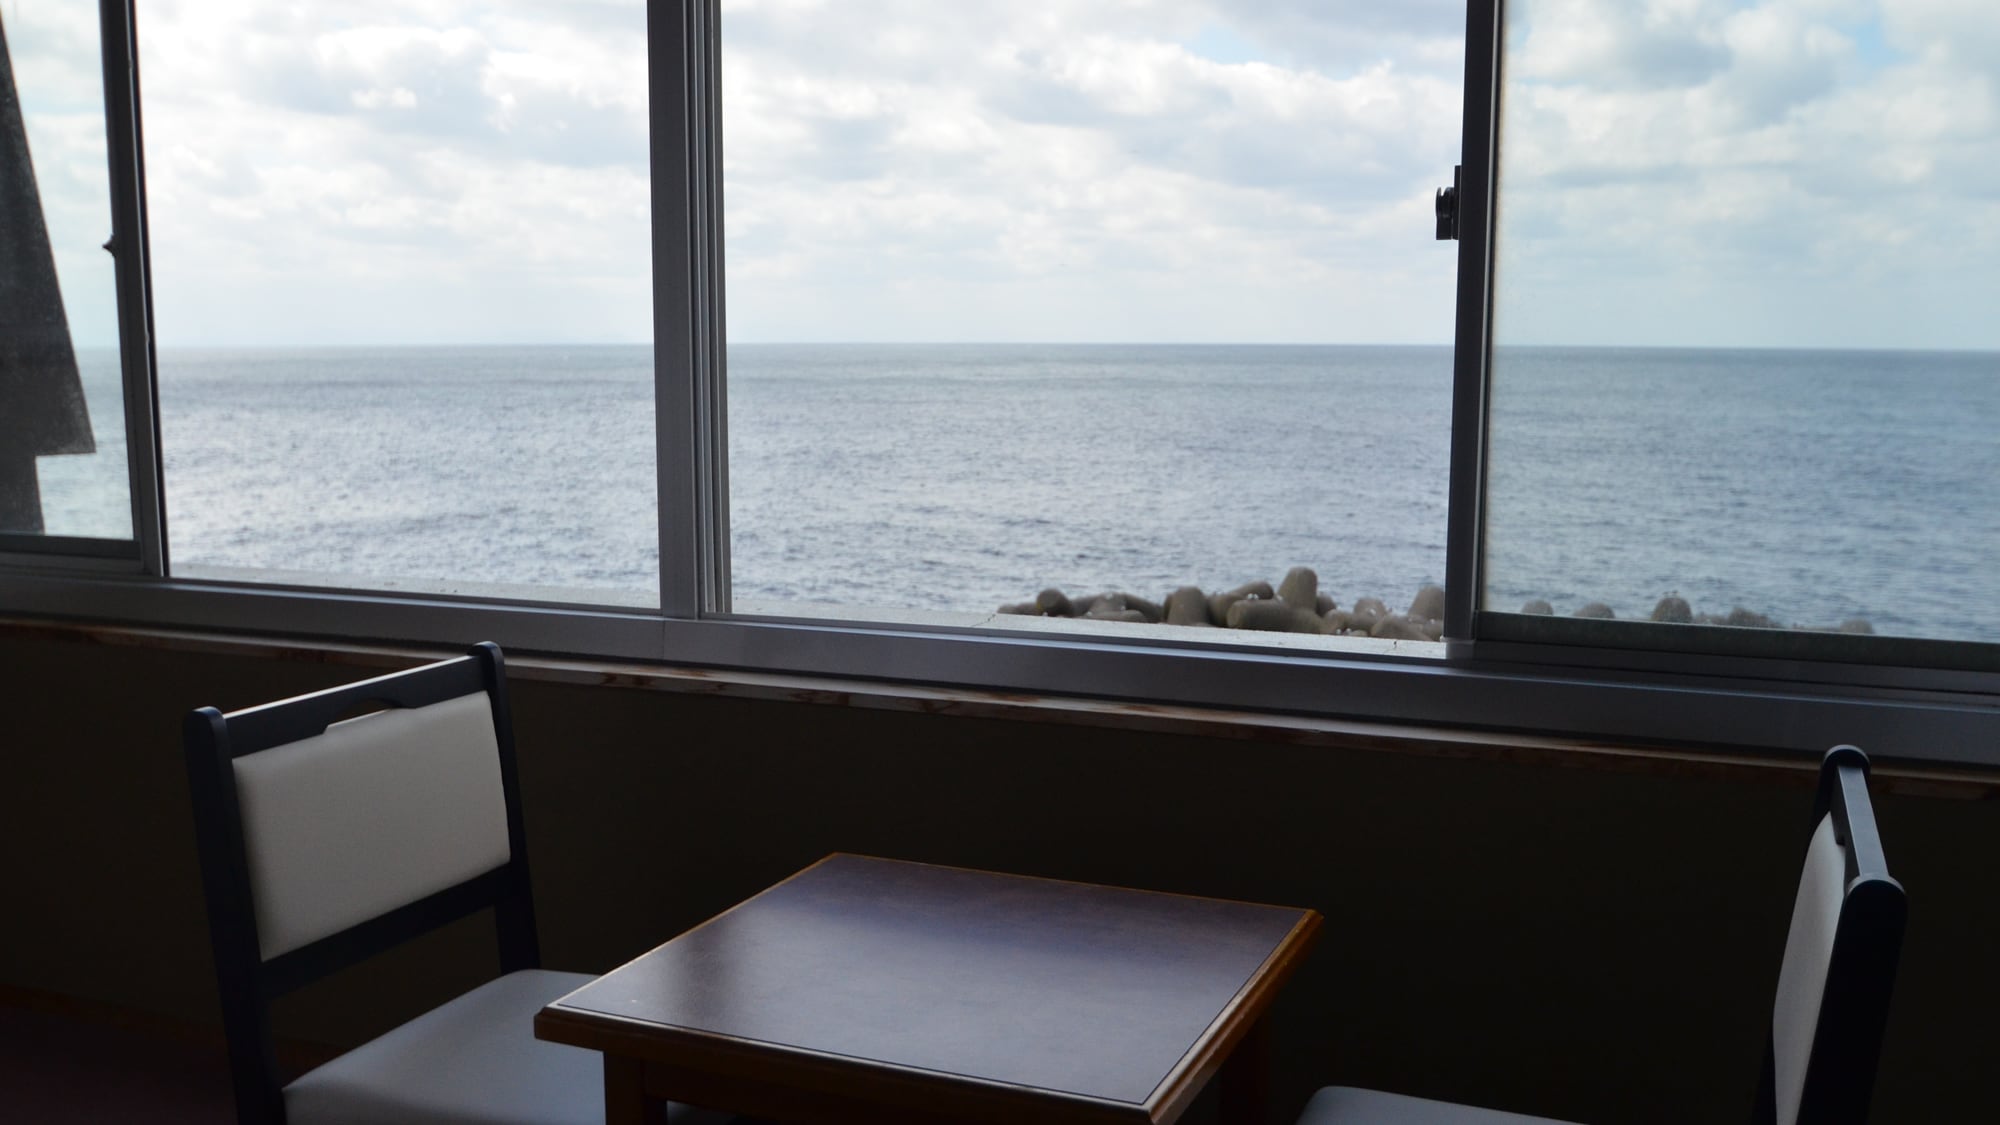 ■ Sea side Japanese-style room, view from the chair table set by the window